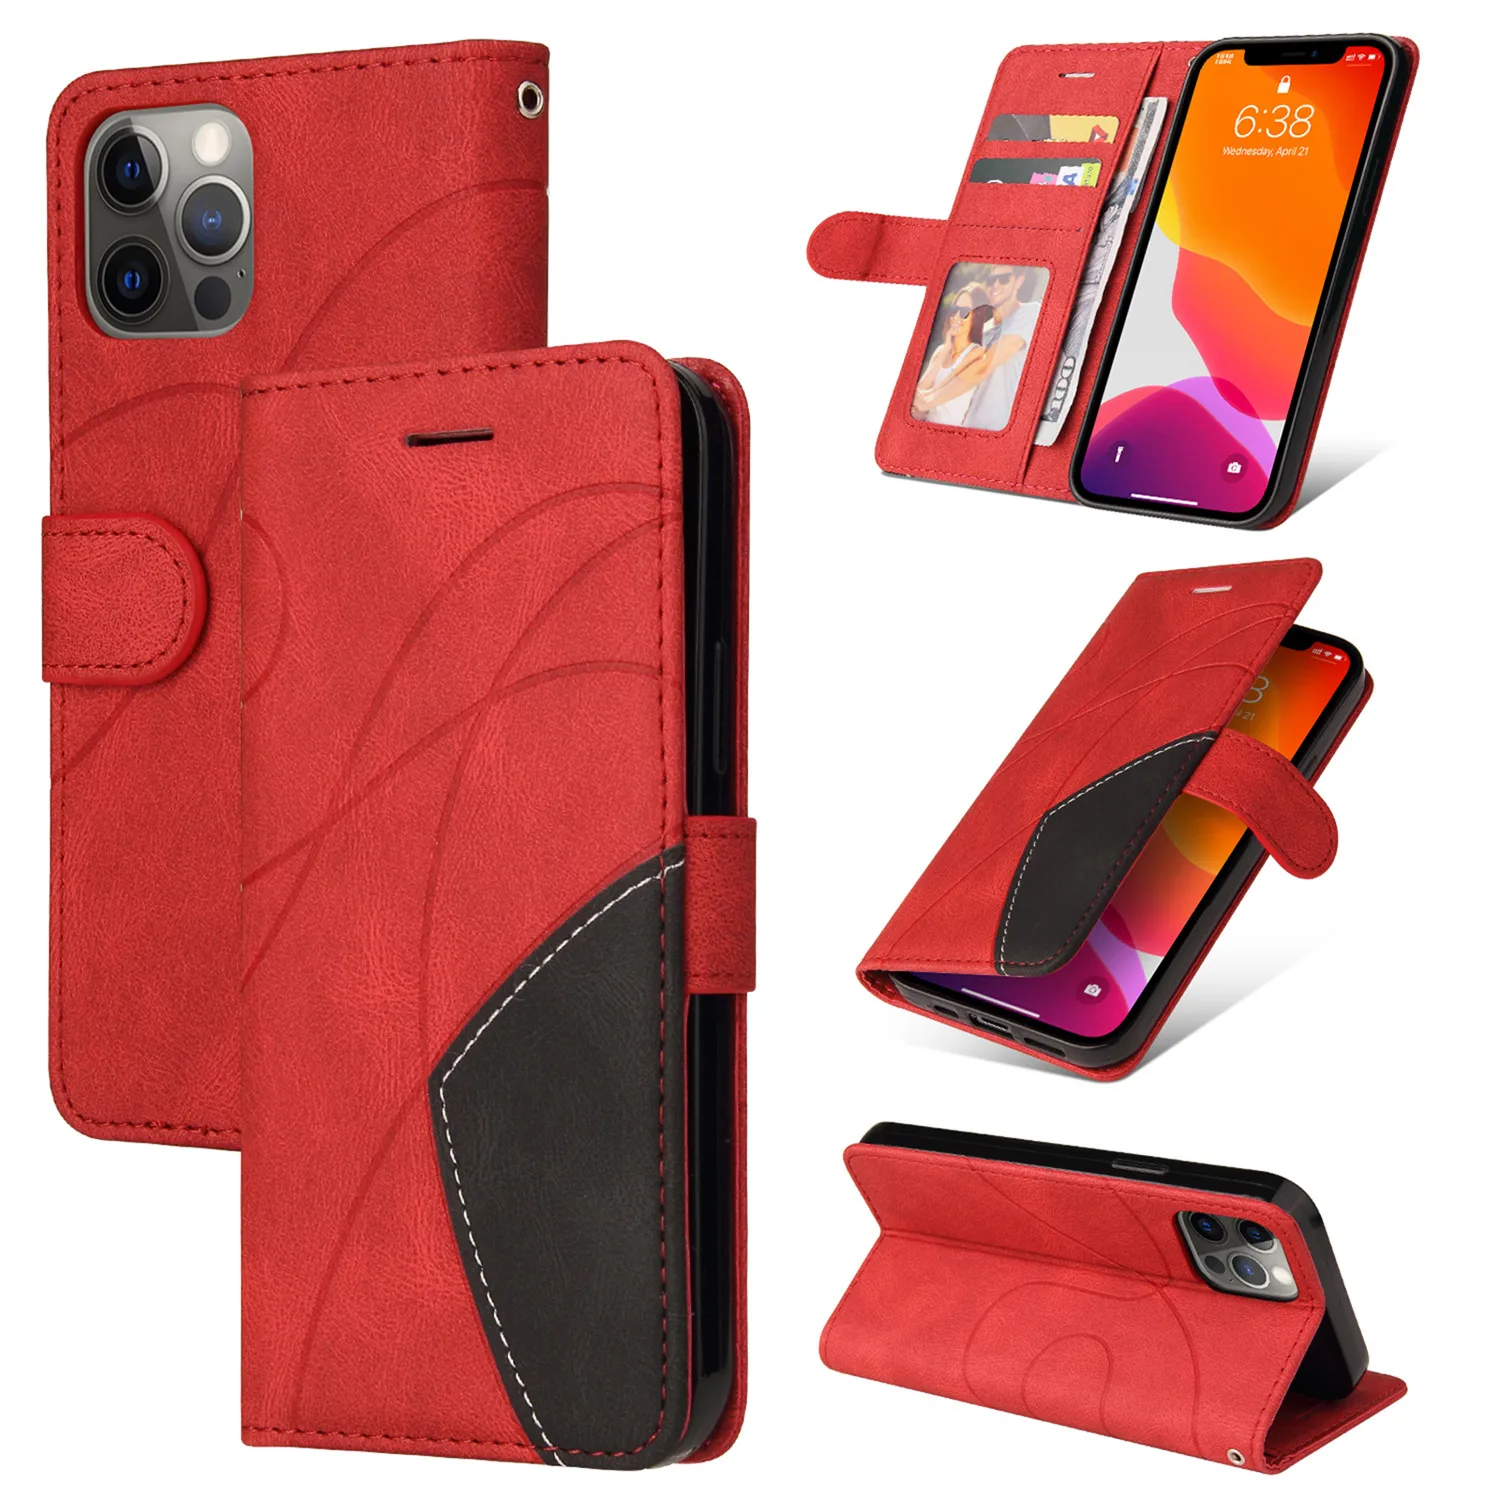 

Flip Case For LG K8 K10 2017 G9 K40 K41S K50S K51 K61 K22 Plus K42 K52 K92 Stylo 6 7 Skin Touch Magnetic Card Stand Wallet Cover